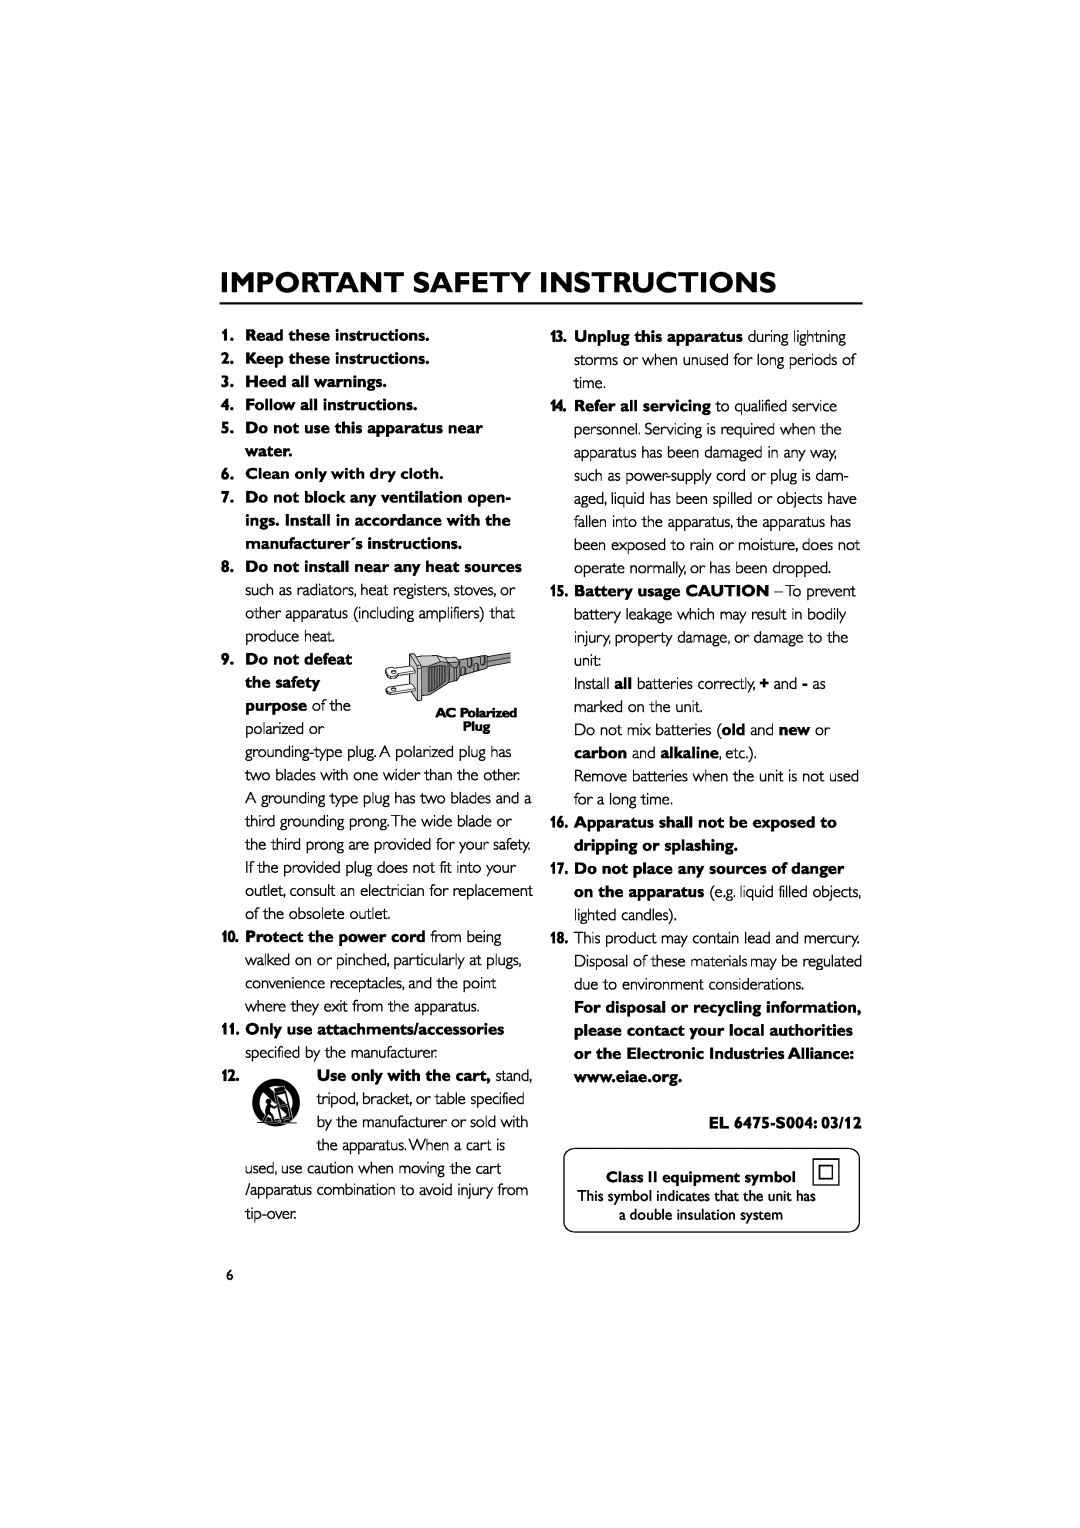 Philips FWM575/37B owner manual Important Safety Instructions, Clean only with dry cloth, Class II equipment symbol 